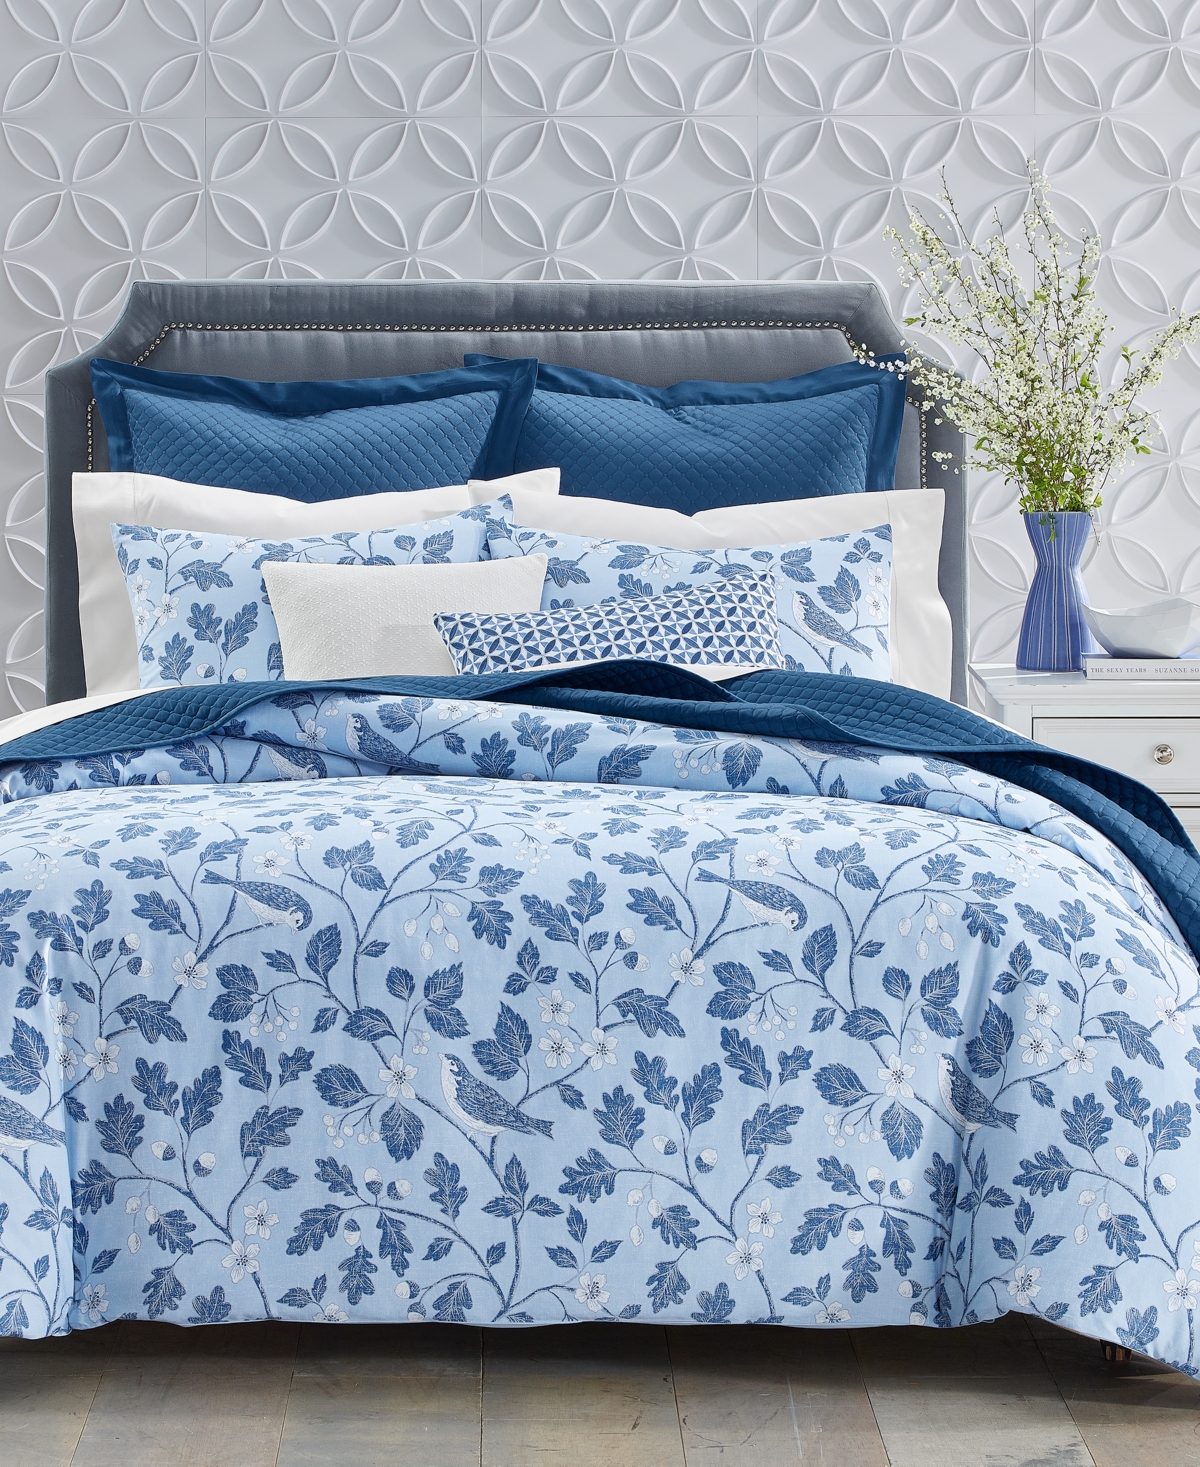 Charter Club Aviary 3-pc. Comforter Set, Full/queen, Created For Macy's In Blue